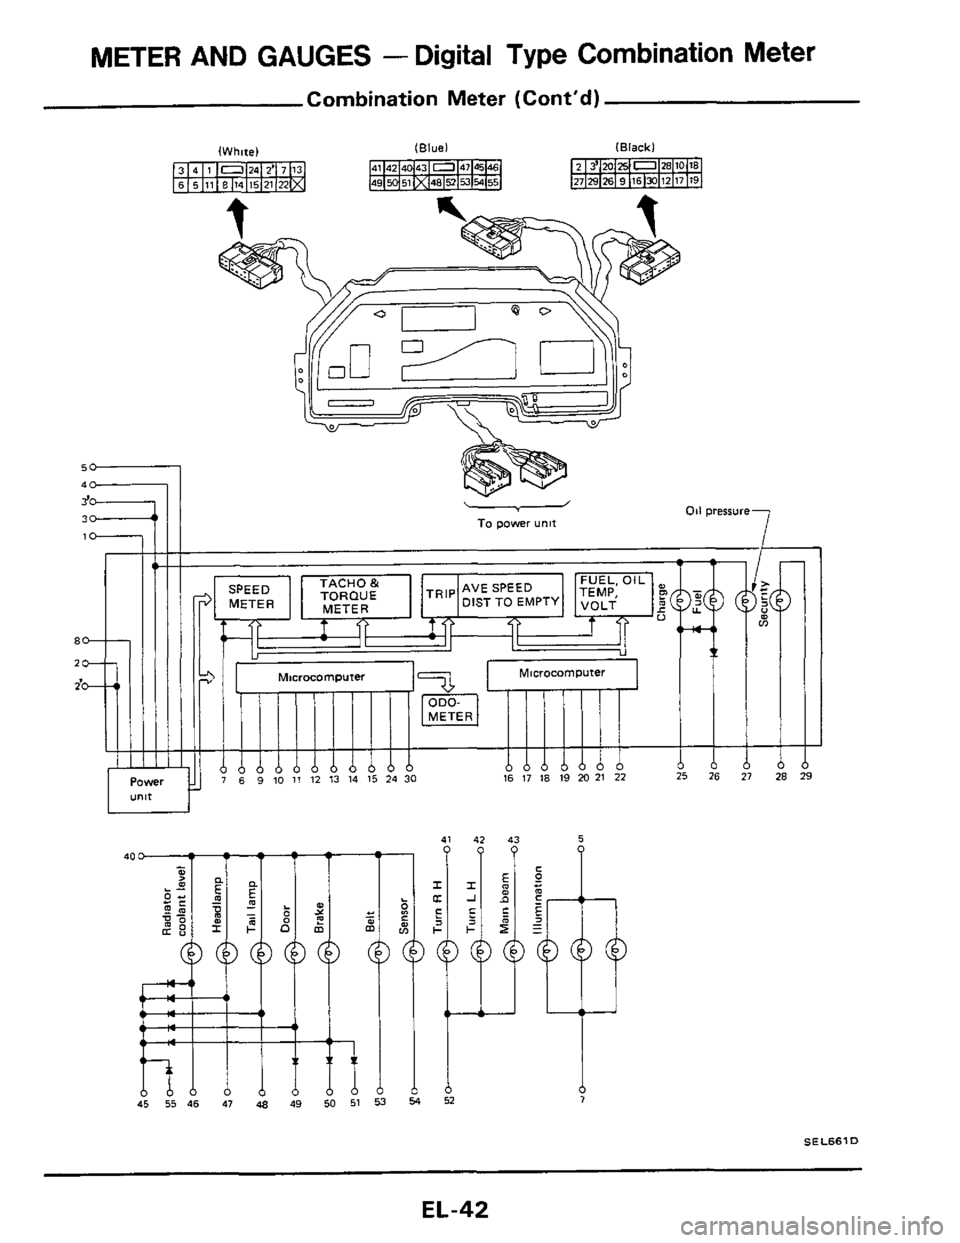 NISSAN 300ZX 1984 Z31 Electrical System Service Manual METER AND GAUGES - Digital  Type  Combination  Meter 
Combination  Meter (Contd) 
-- 
Power ""lt 
To power unit 
12 13 14 15 24 30 16 17 18 19 20 21 22 6 21 28 
40 
45 55 46 47 48 49 50 51 53 54 
;I4